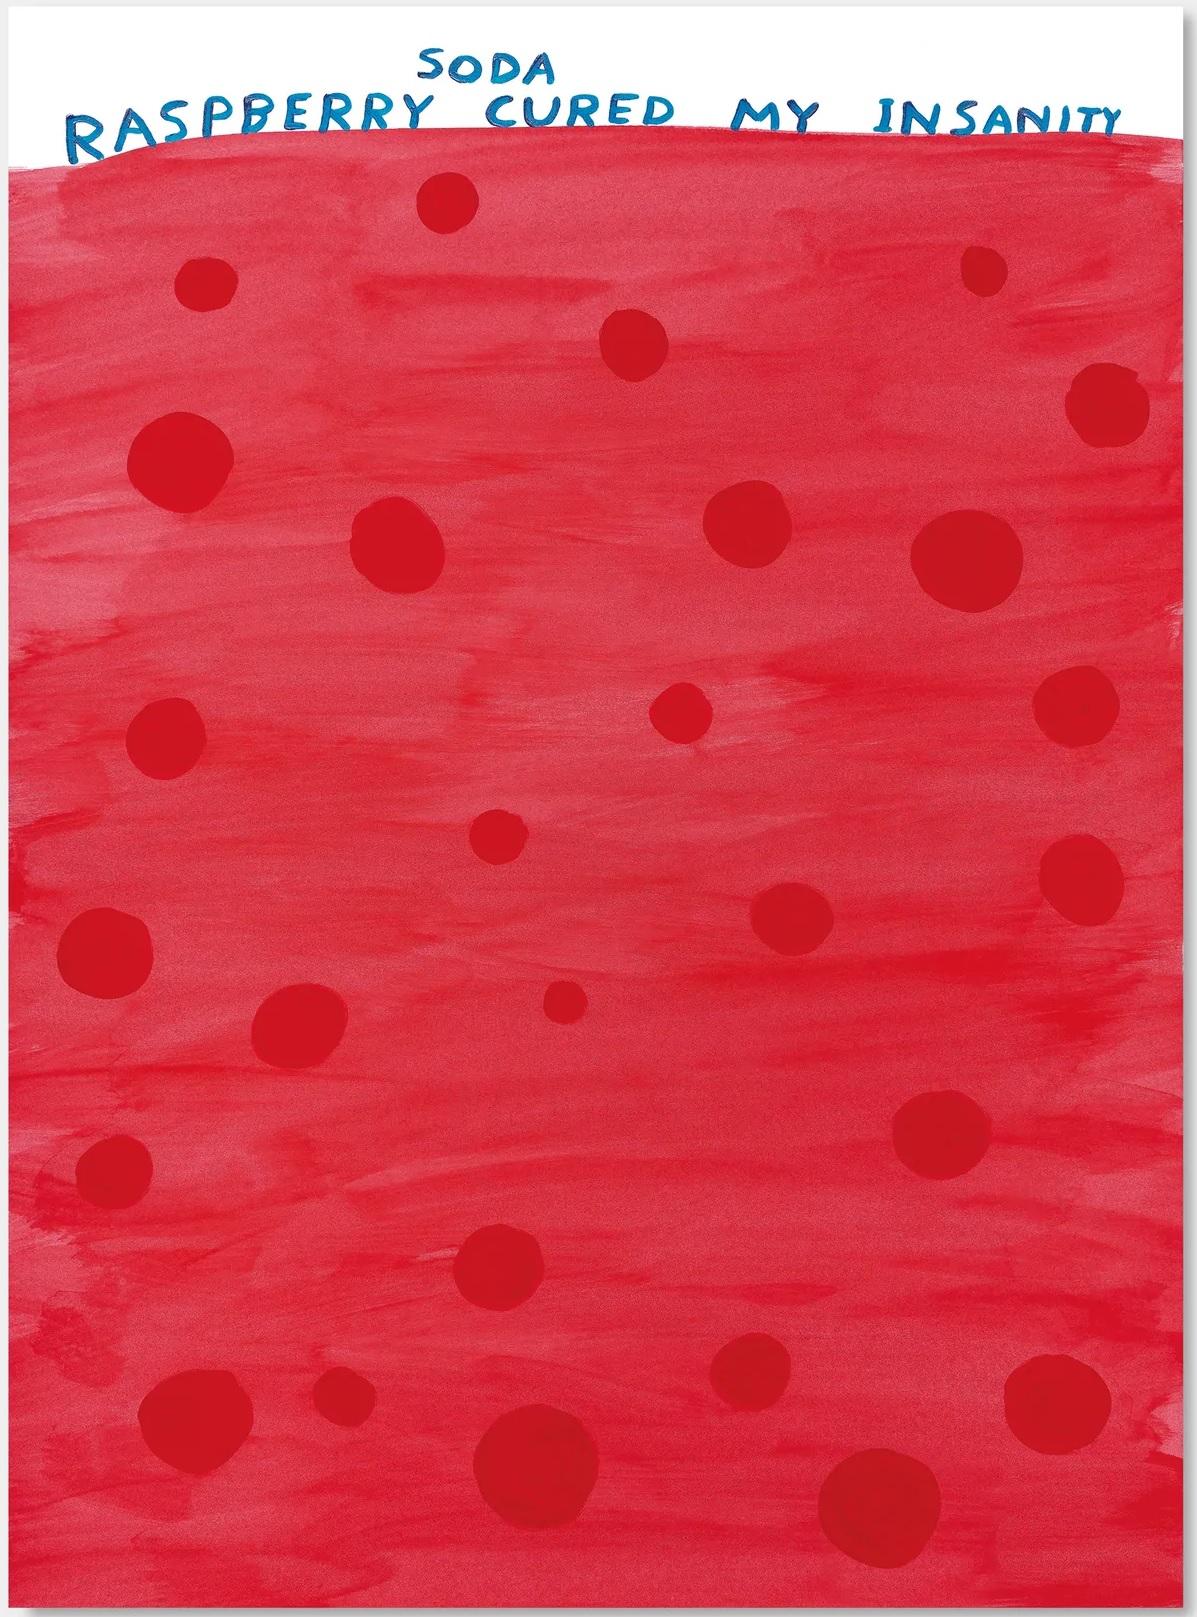 David Shrigley -- Raspberry soda cured my insanity, 2022
70 x 50 cm
It is created from the unique work: Untitled (Raspberry soda cured my insanity) (2022)
Printed on 200g Munken Lynx paper
Printed by Narayana Press in Denmark
Unnumbered from the